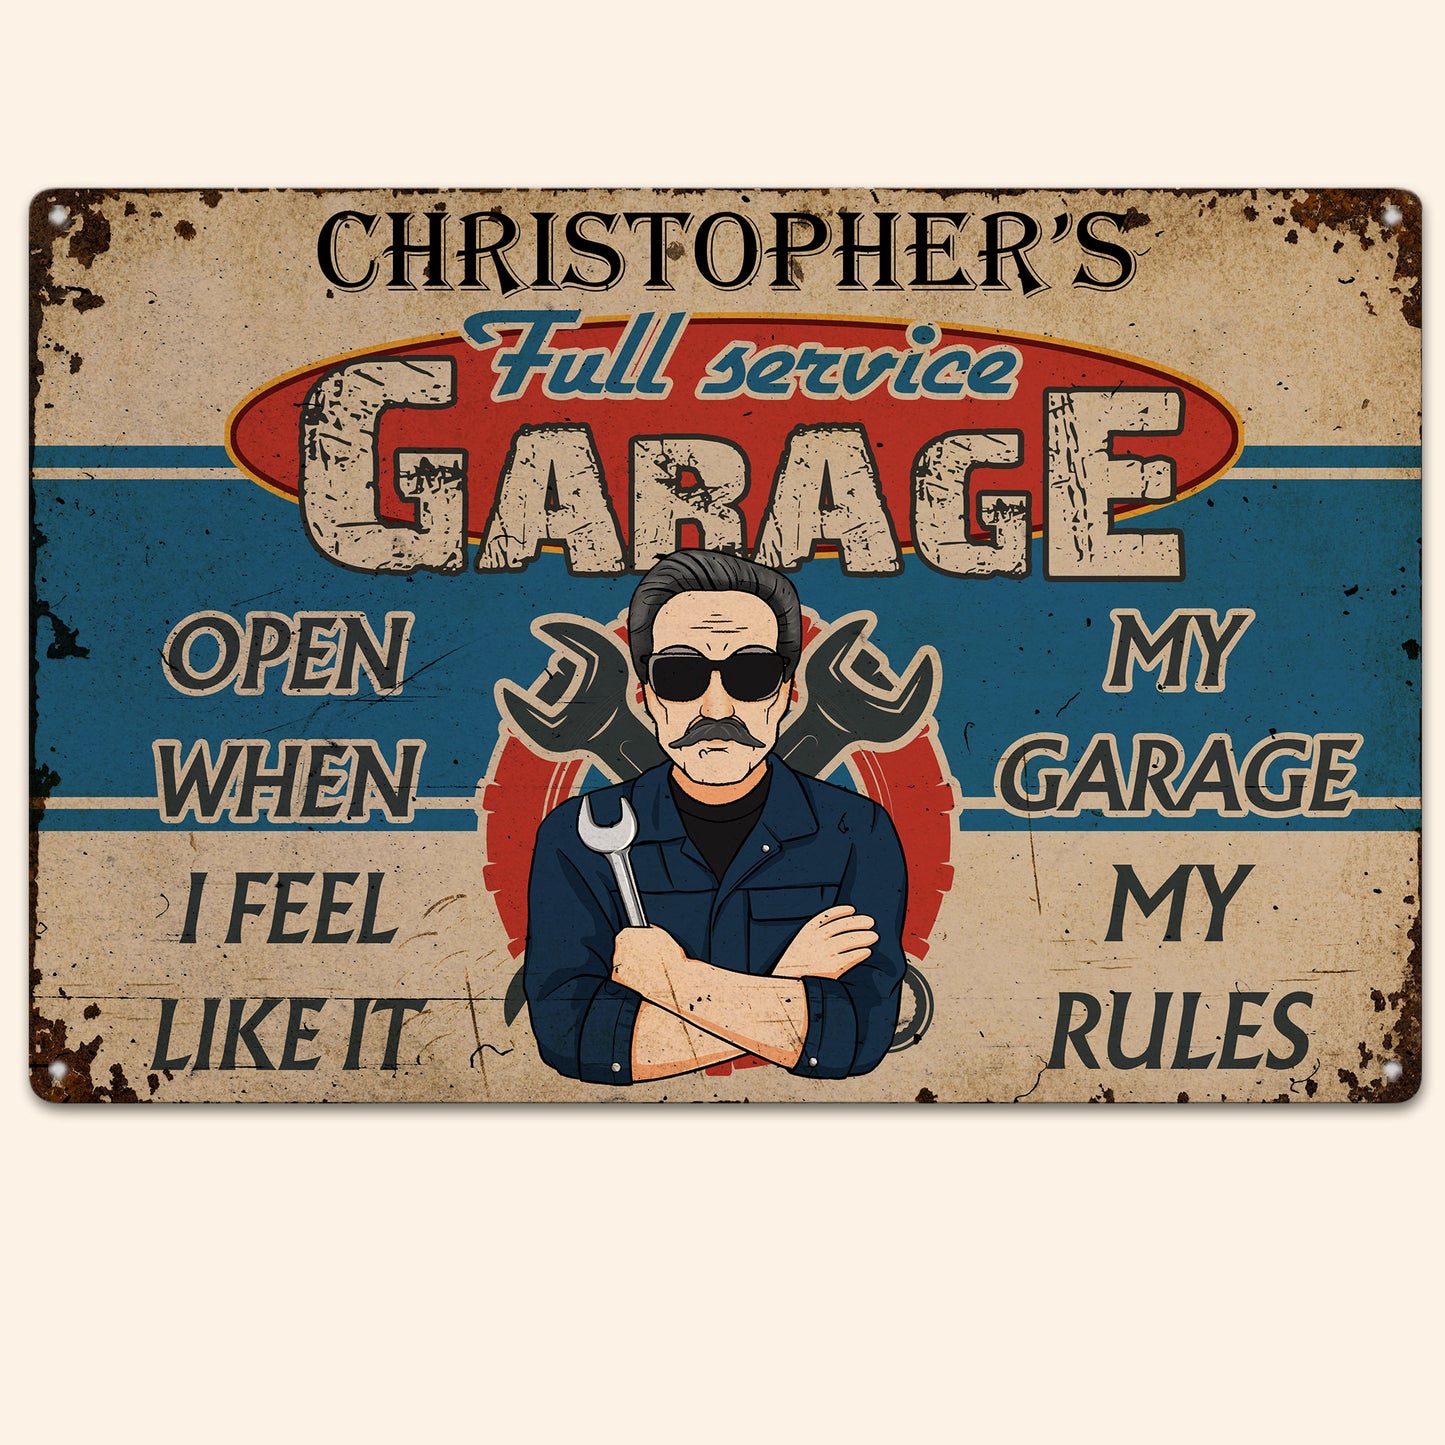 My Garage My Rules  - Personalized Metal Sign